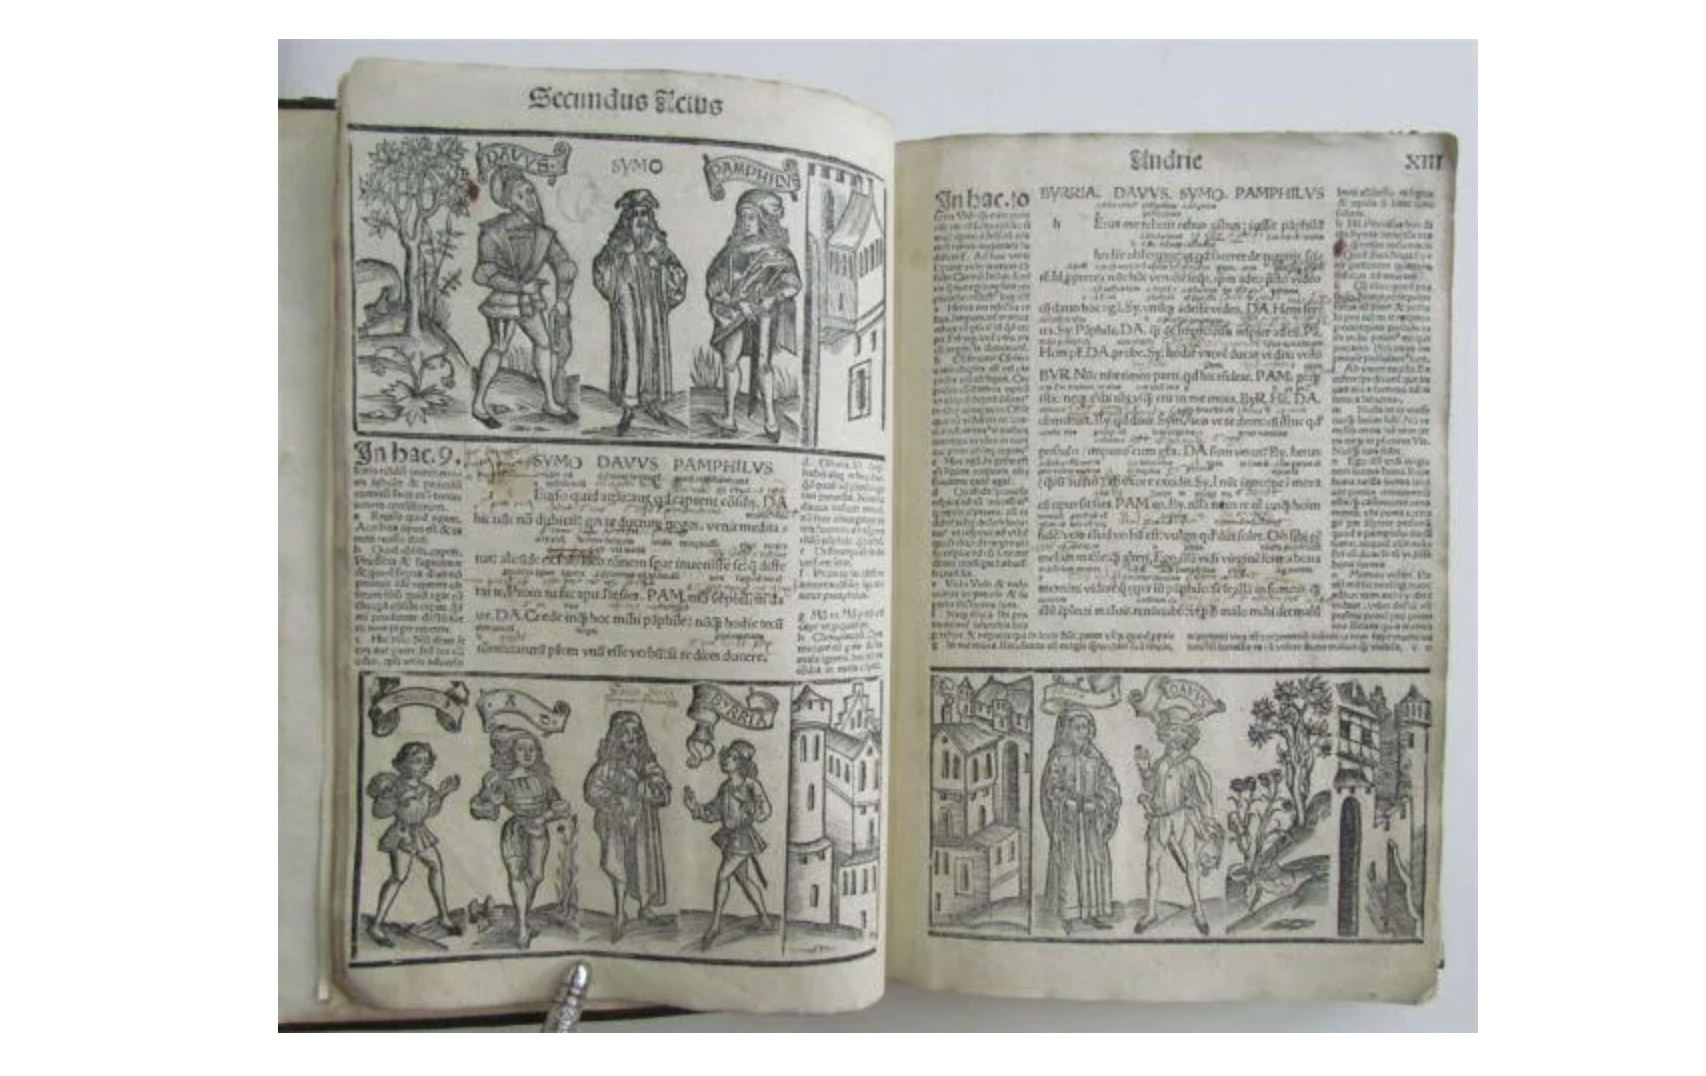  Pages from a 1499 illustrated volume of comedic plays by Terence, est. $12,000-$14,000